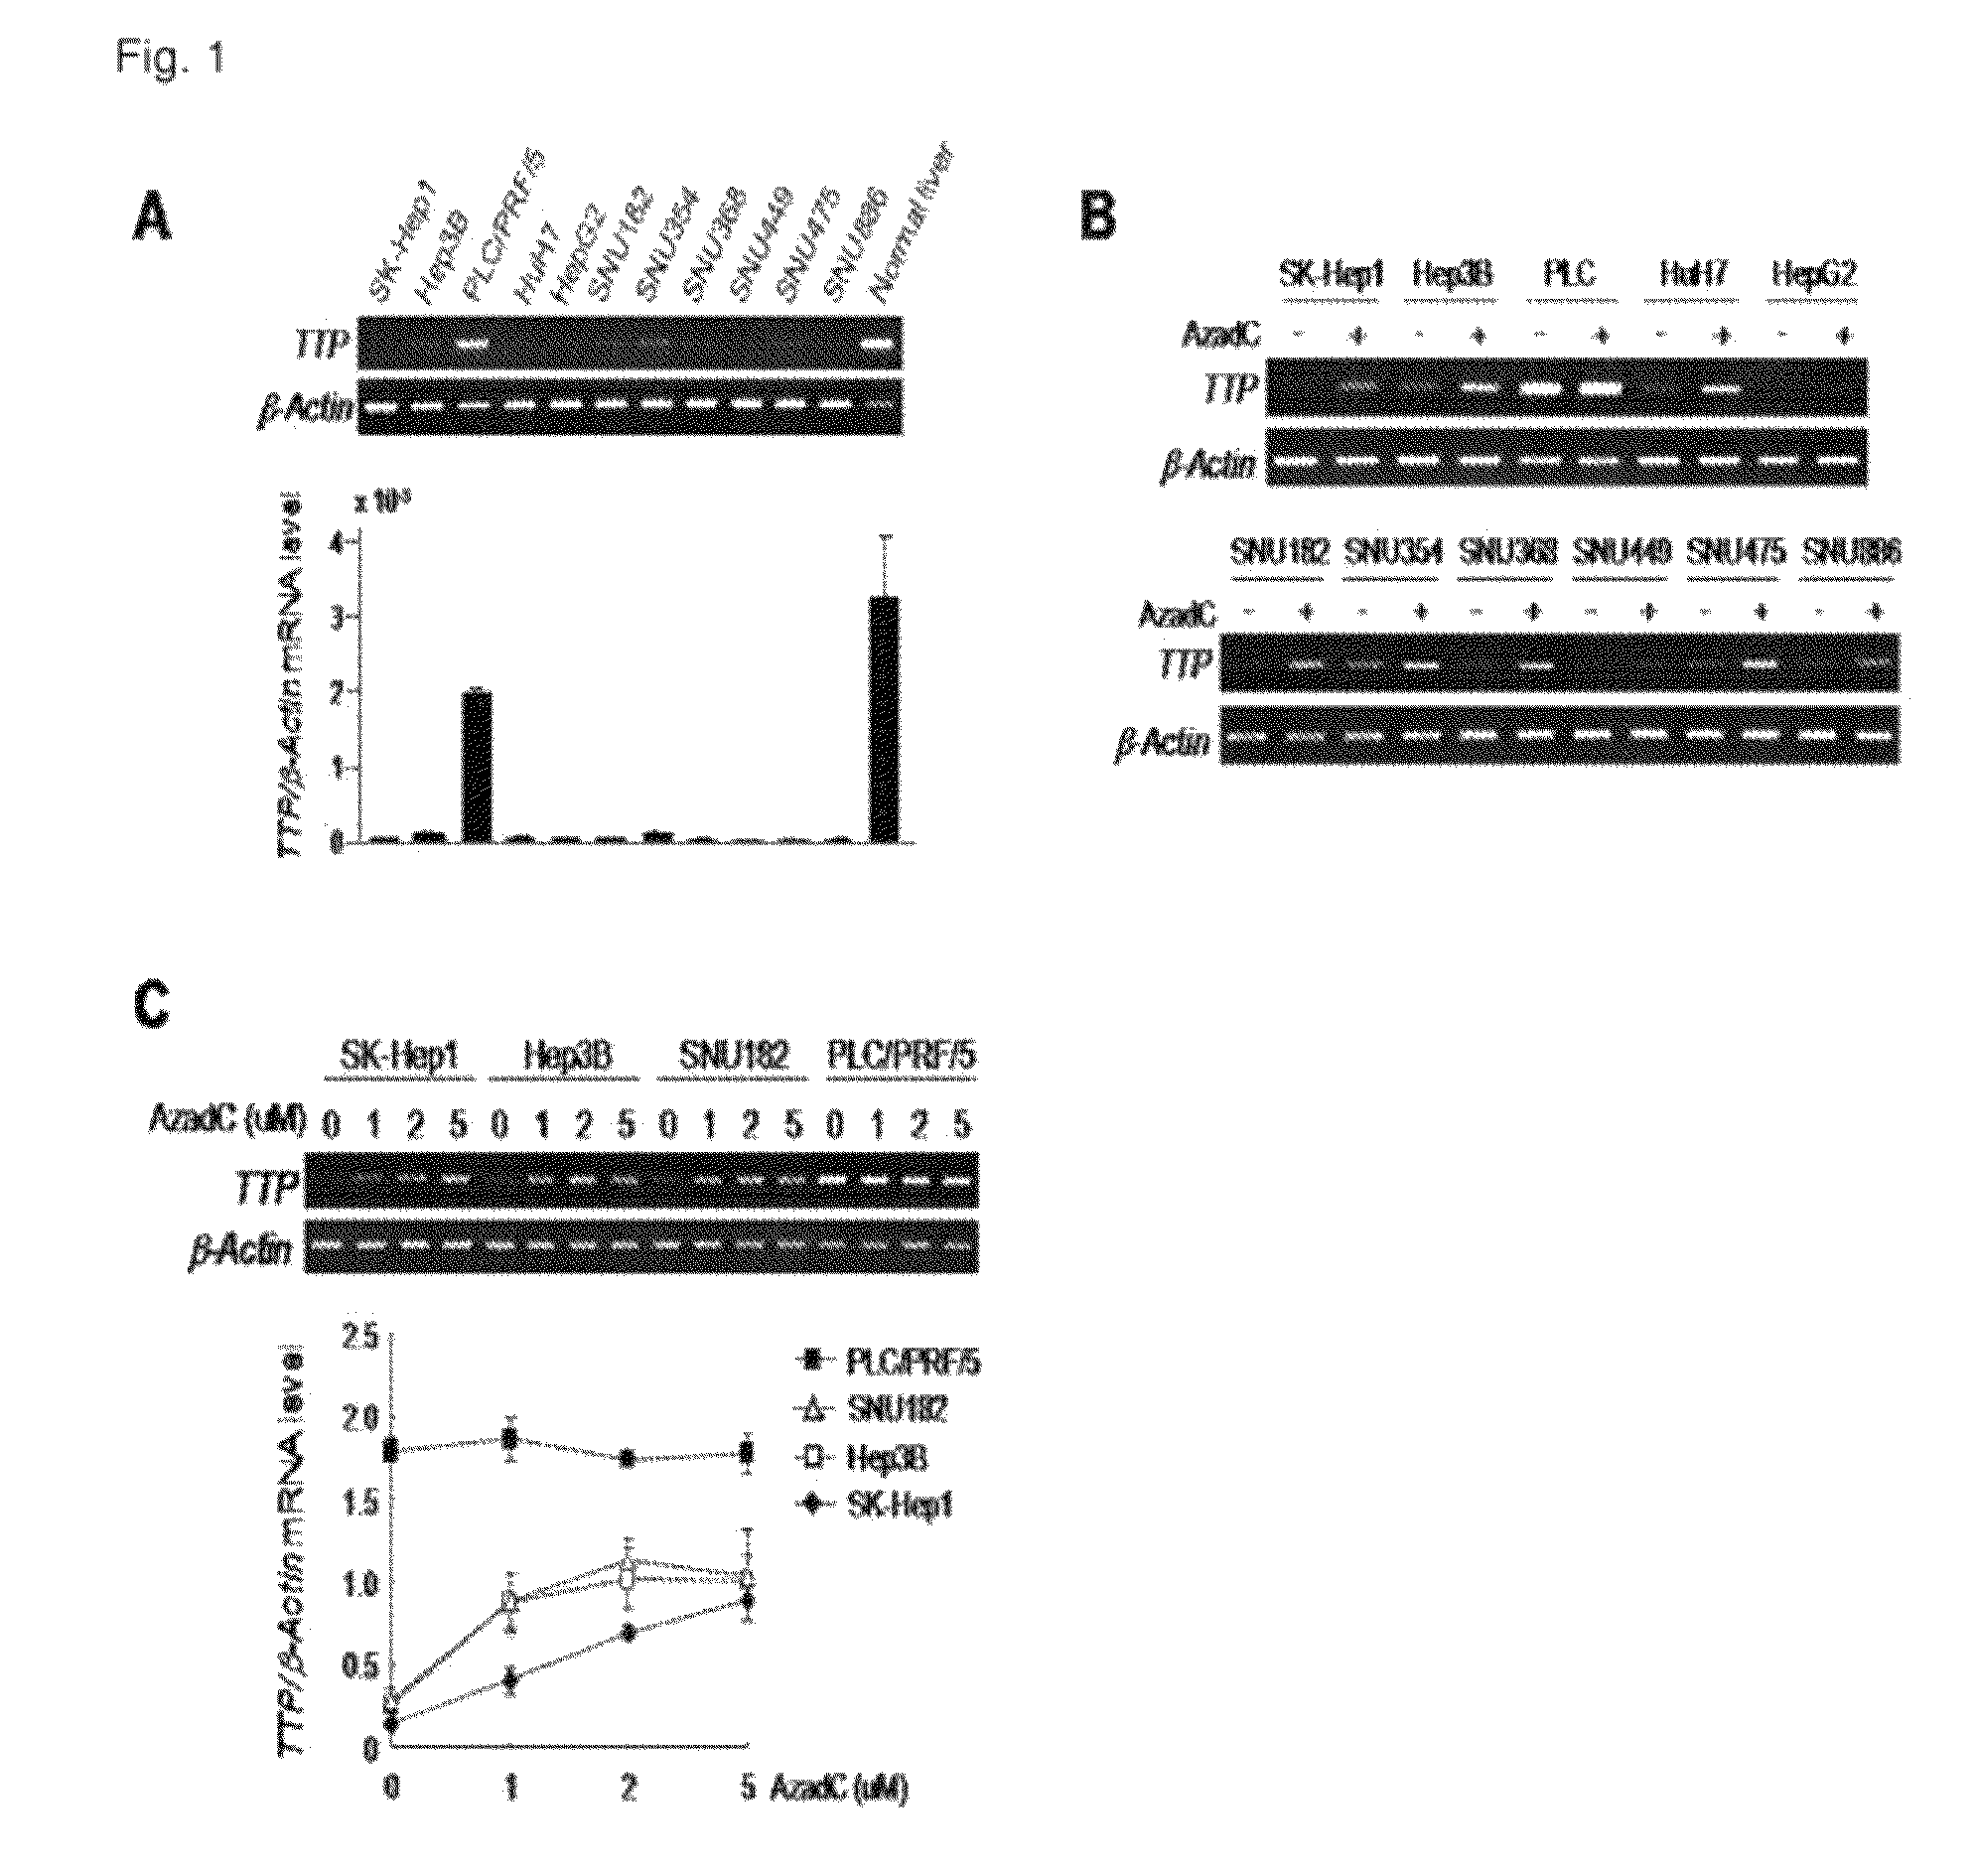 Method for diagnosis/prognosis of cancers using an epigenetic marker consisting of a specific single CpG site in TTP promoter and treatment of cancers by regulating its epigenetic status